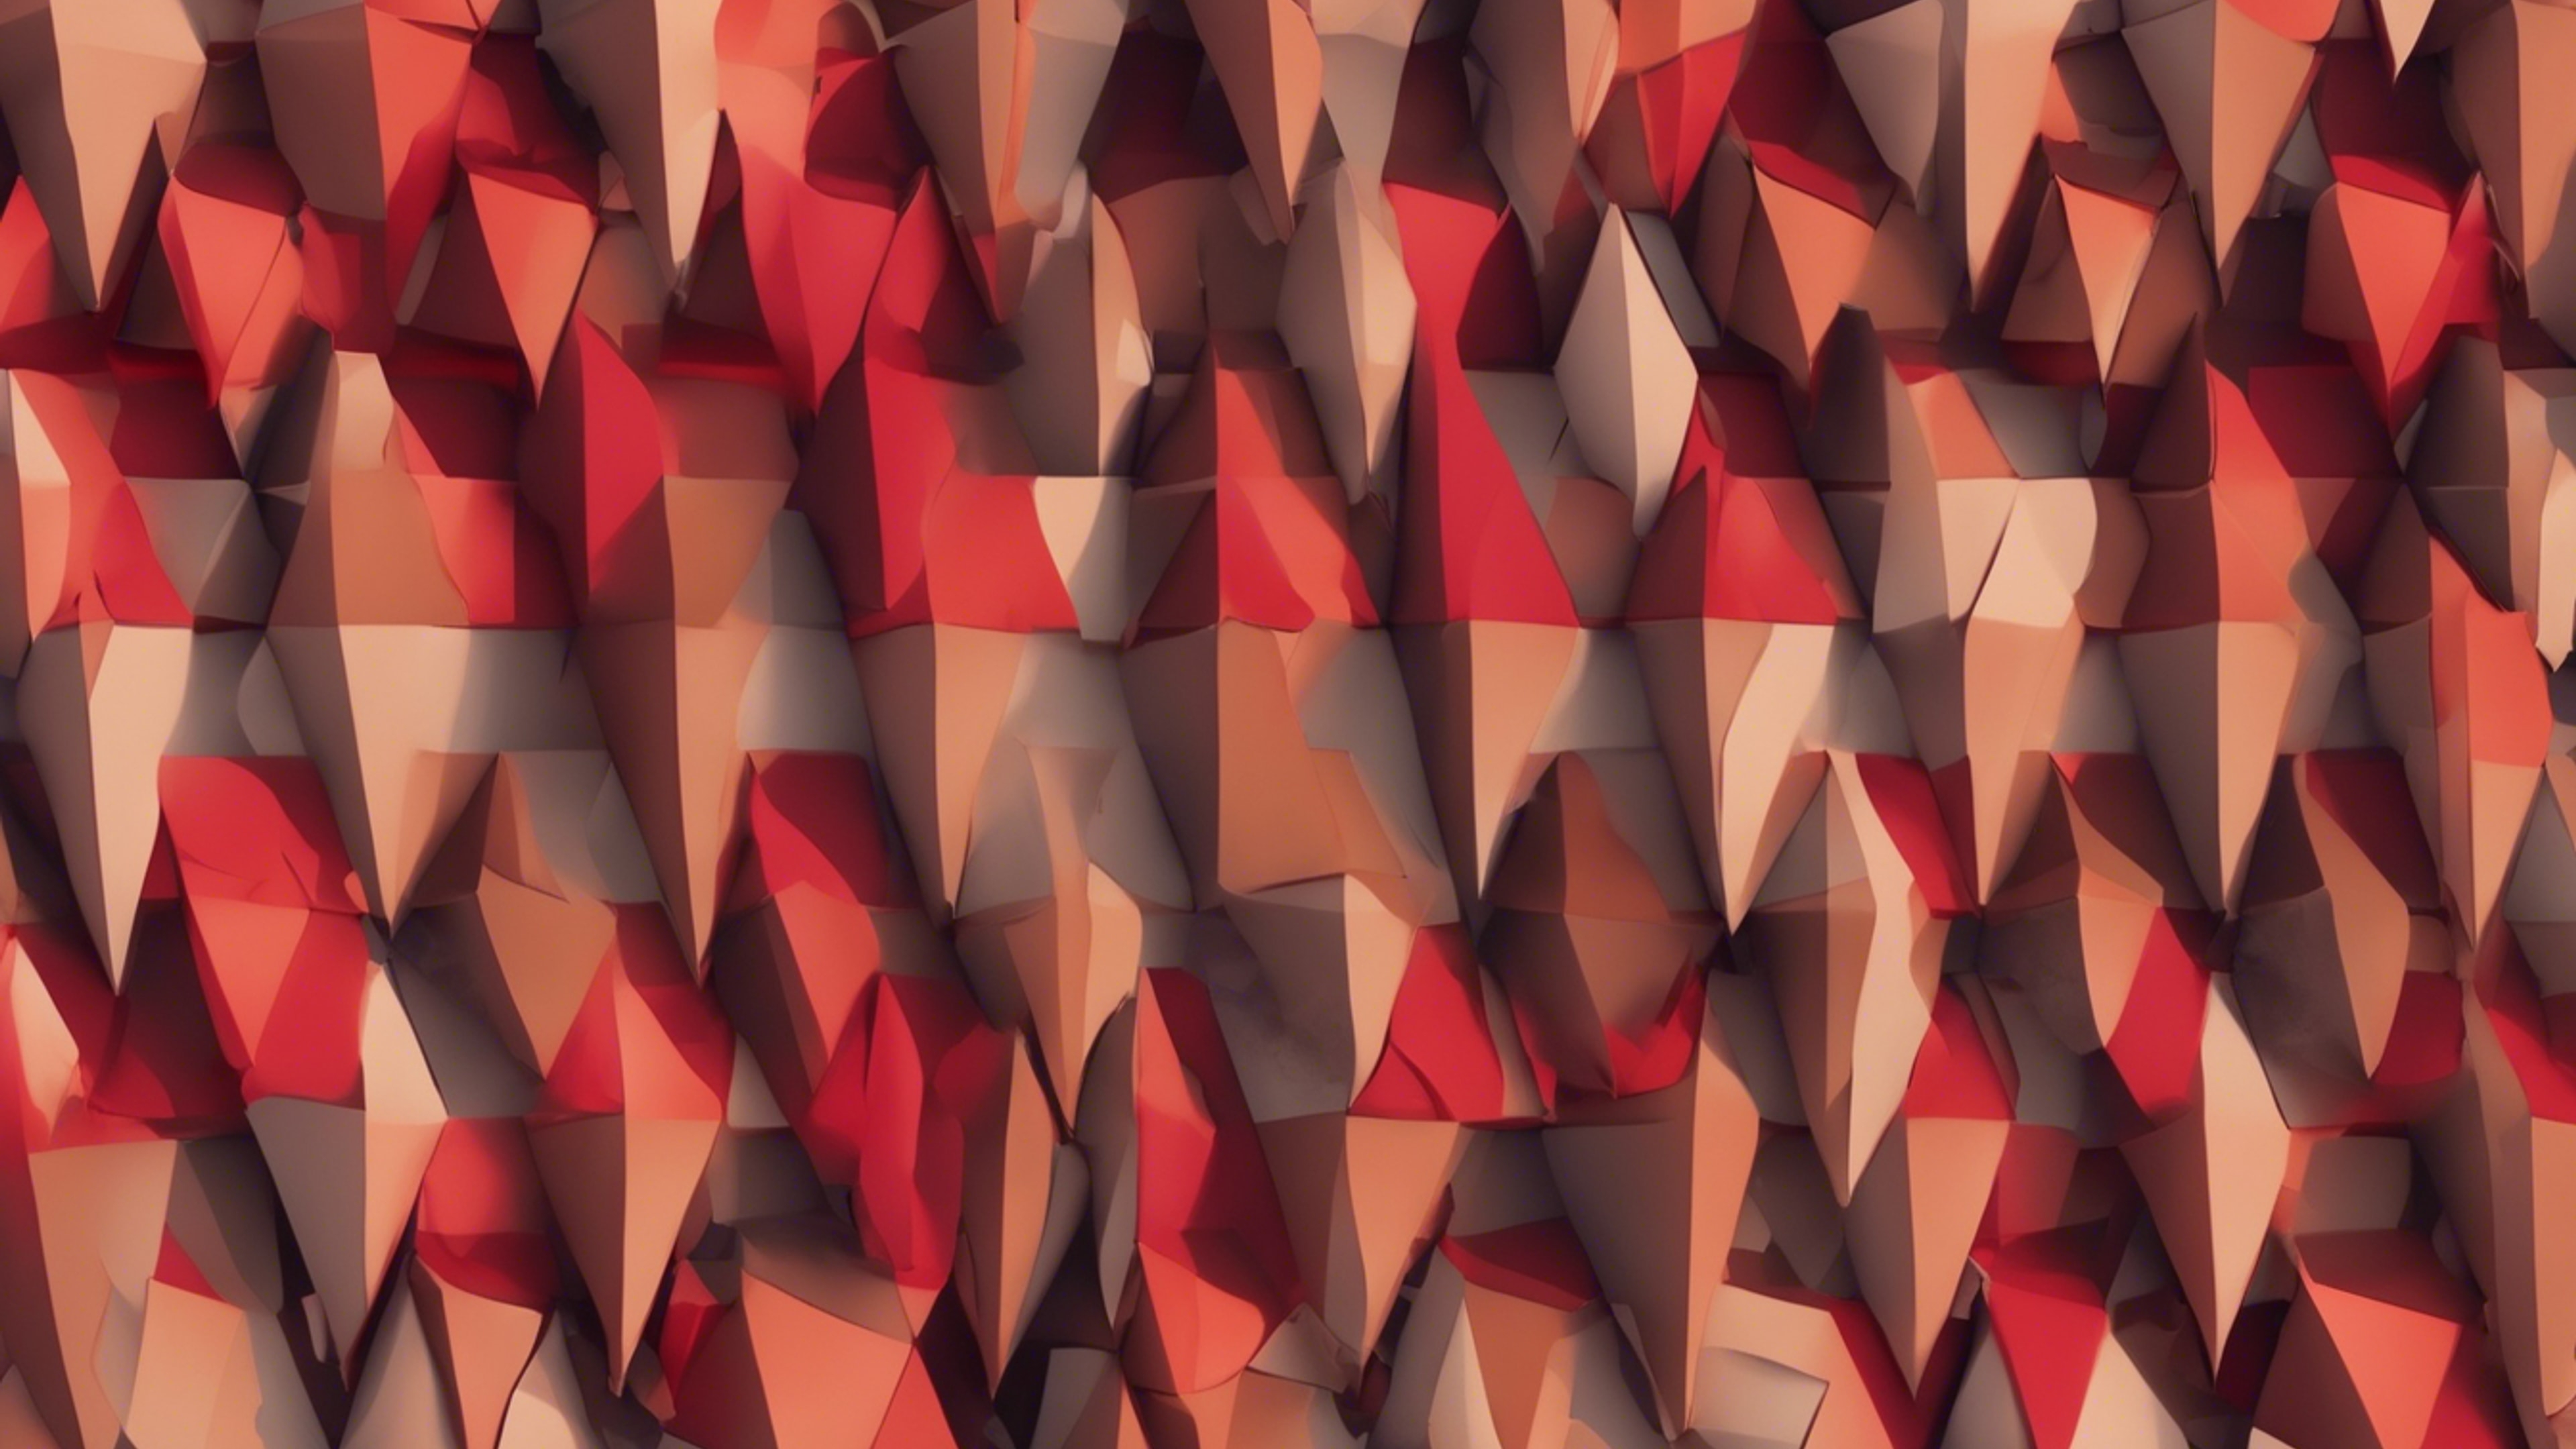 A geometrical abstract pattern consisting of trapeziums in shades of vibrant red and muted brown. Kertas dinding[25af3713355d4095863a]